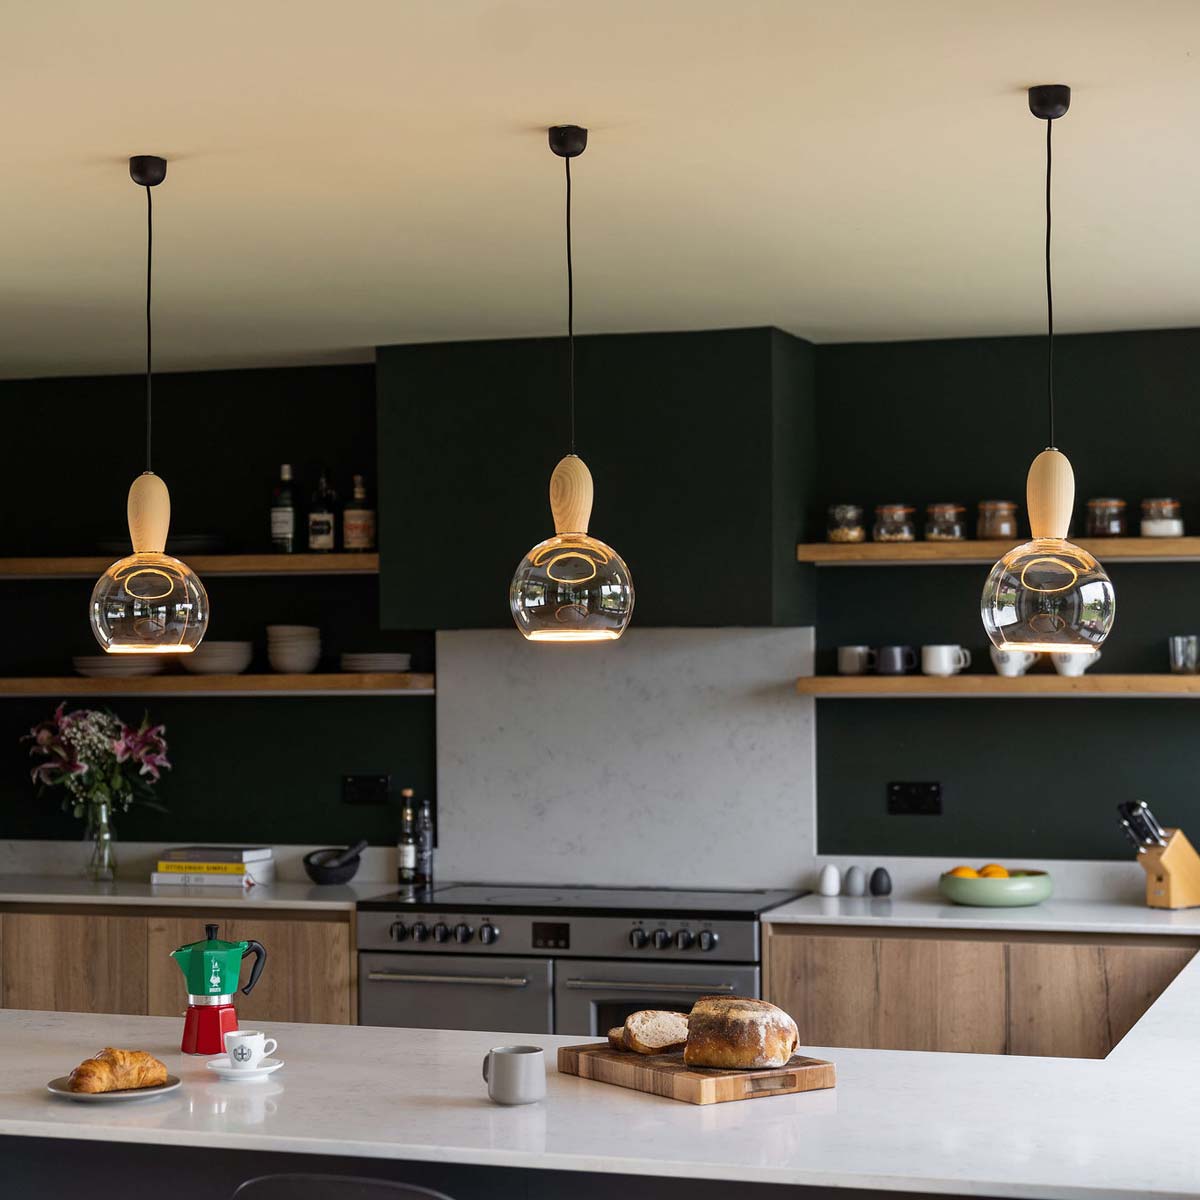 The Woody wood pendant light is supplied by South Charlotte Fine Lighting and can be installed on its own or as part of a series to light a breakfast bar or dining room table